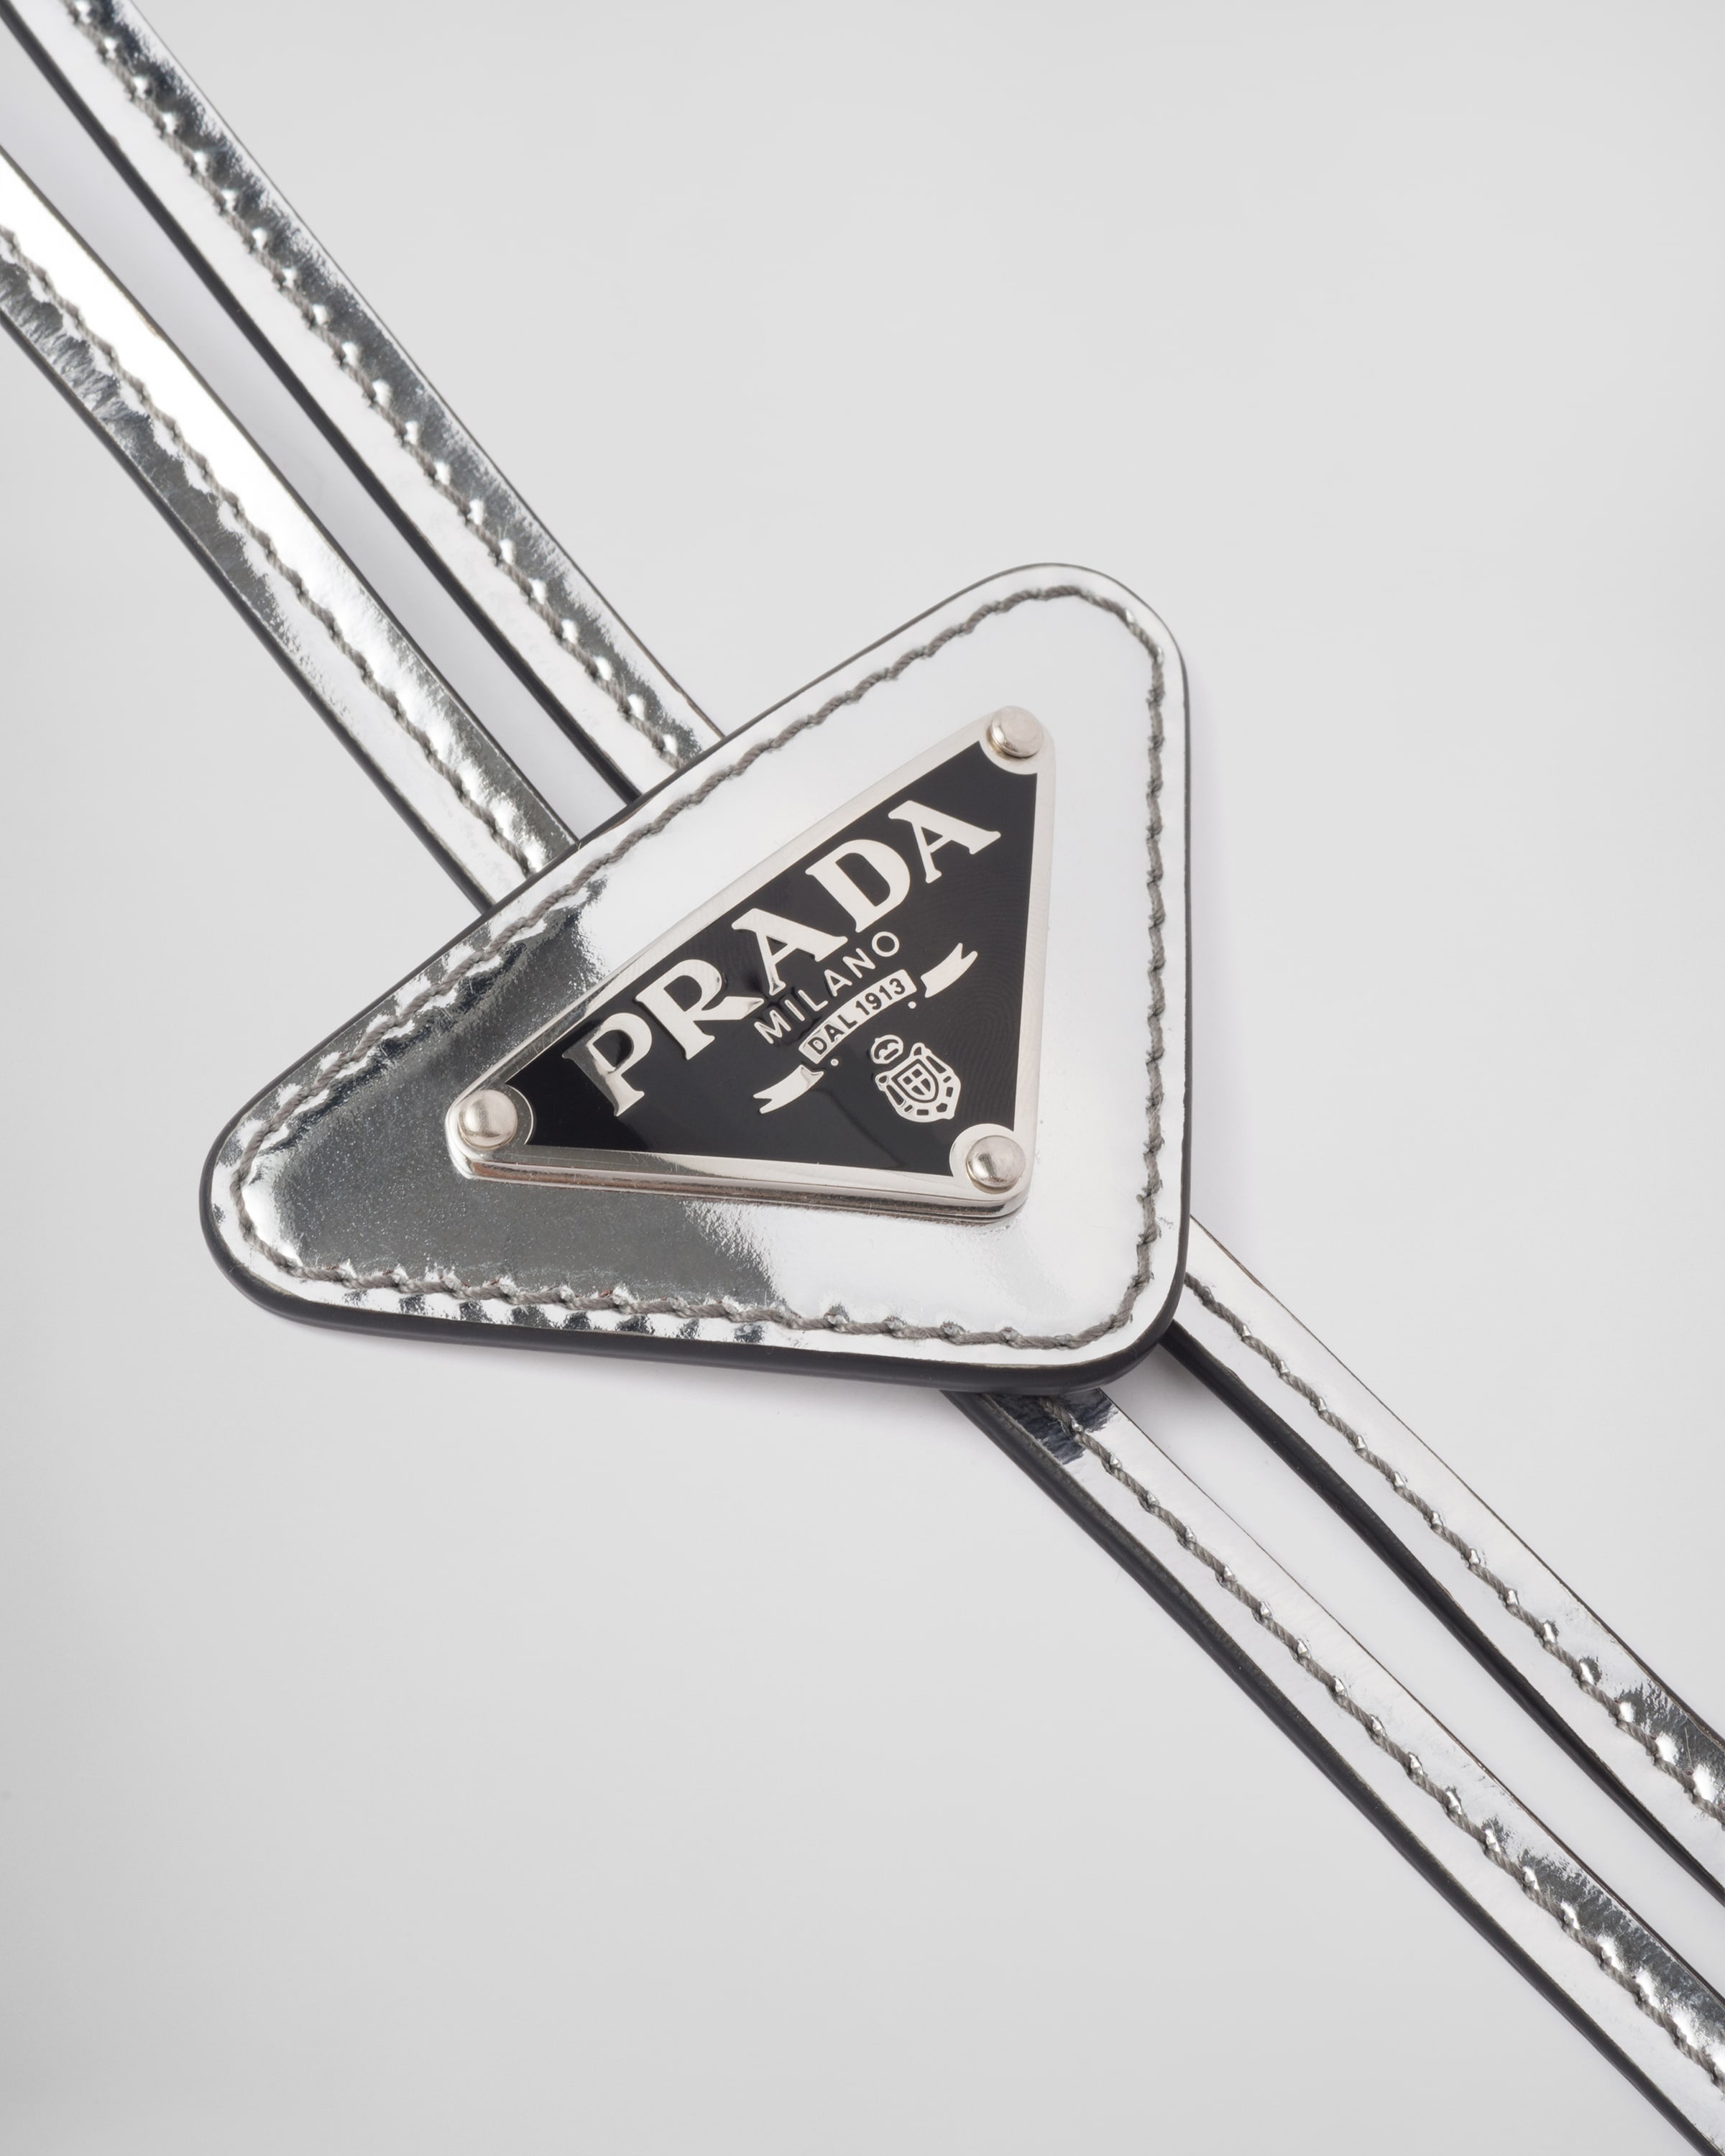 ORDER] Prada Brushed leather bolo tie